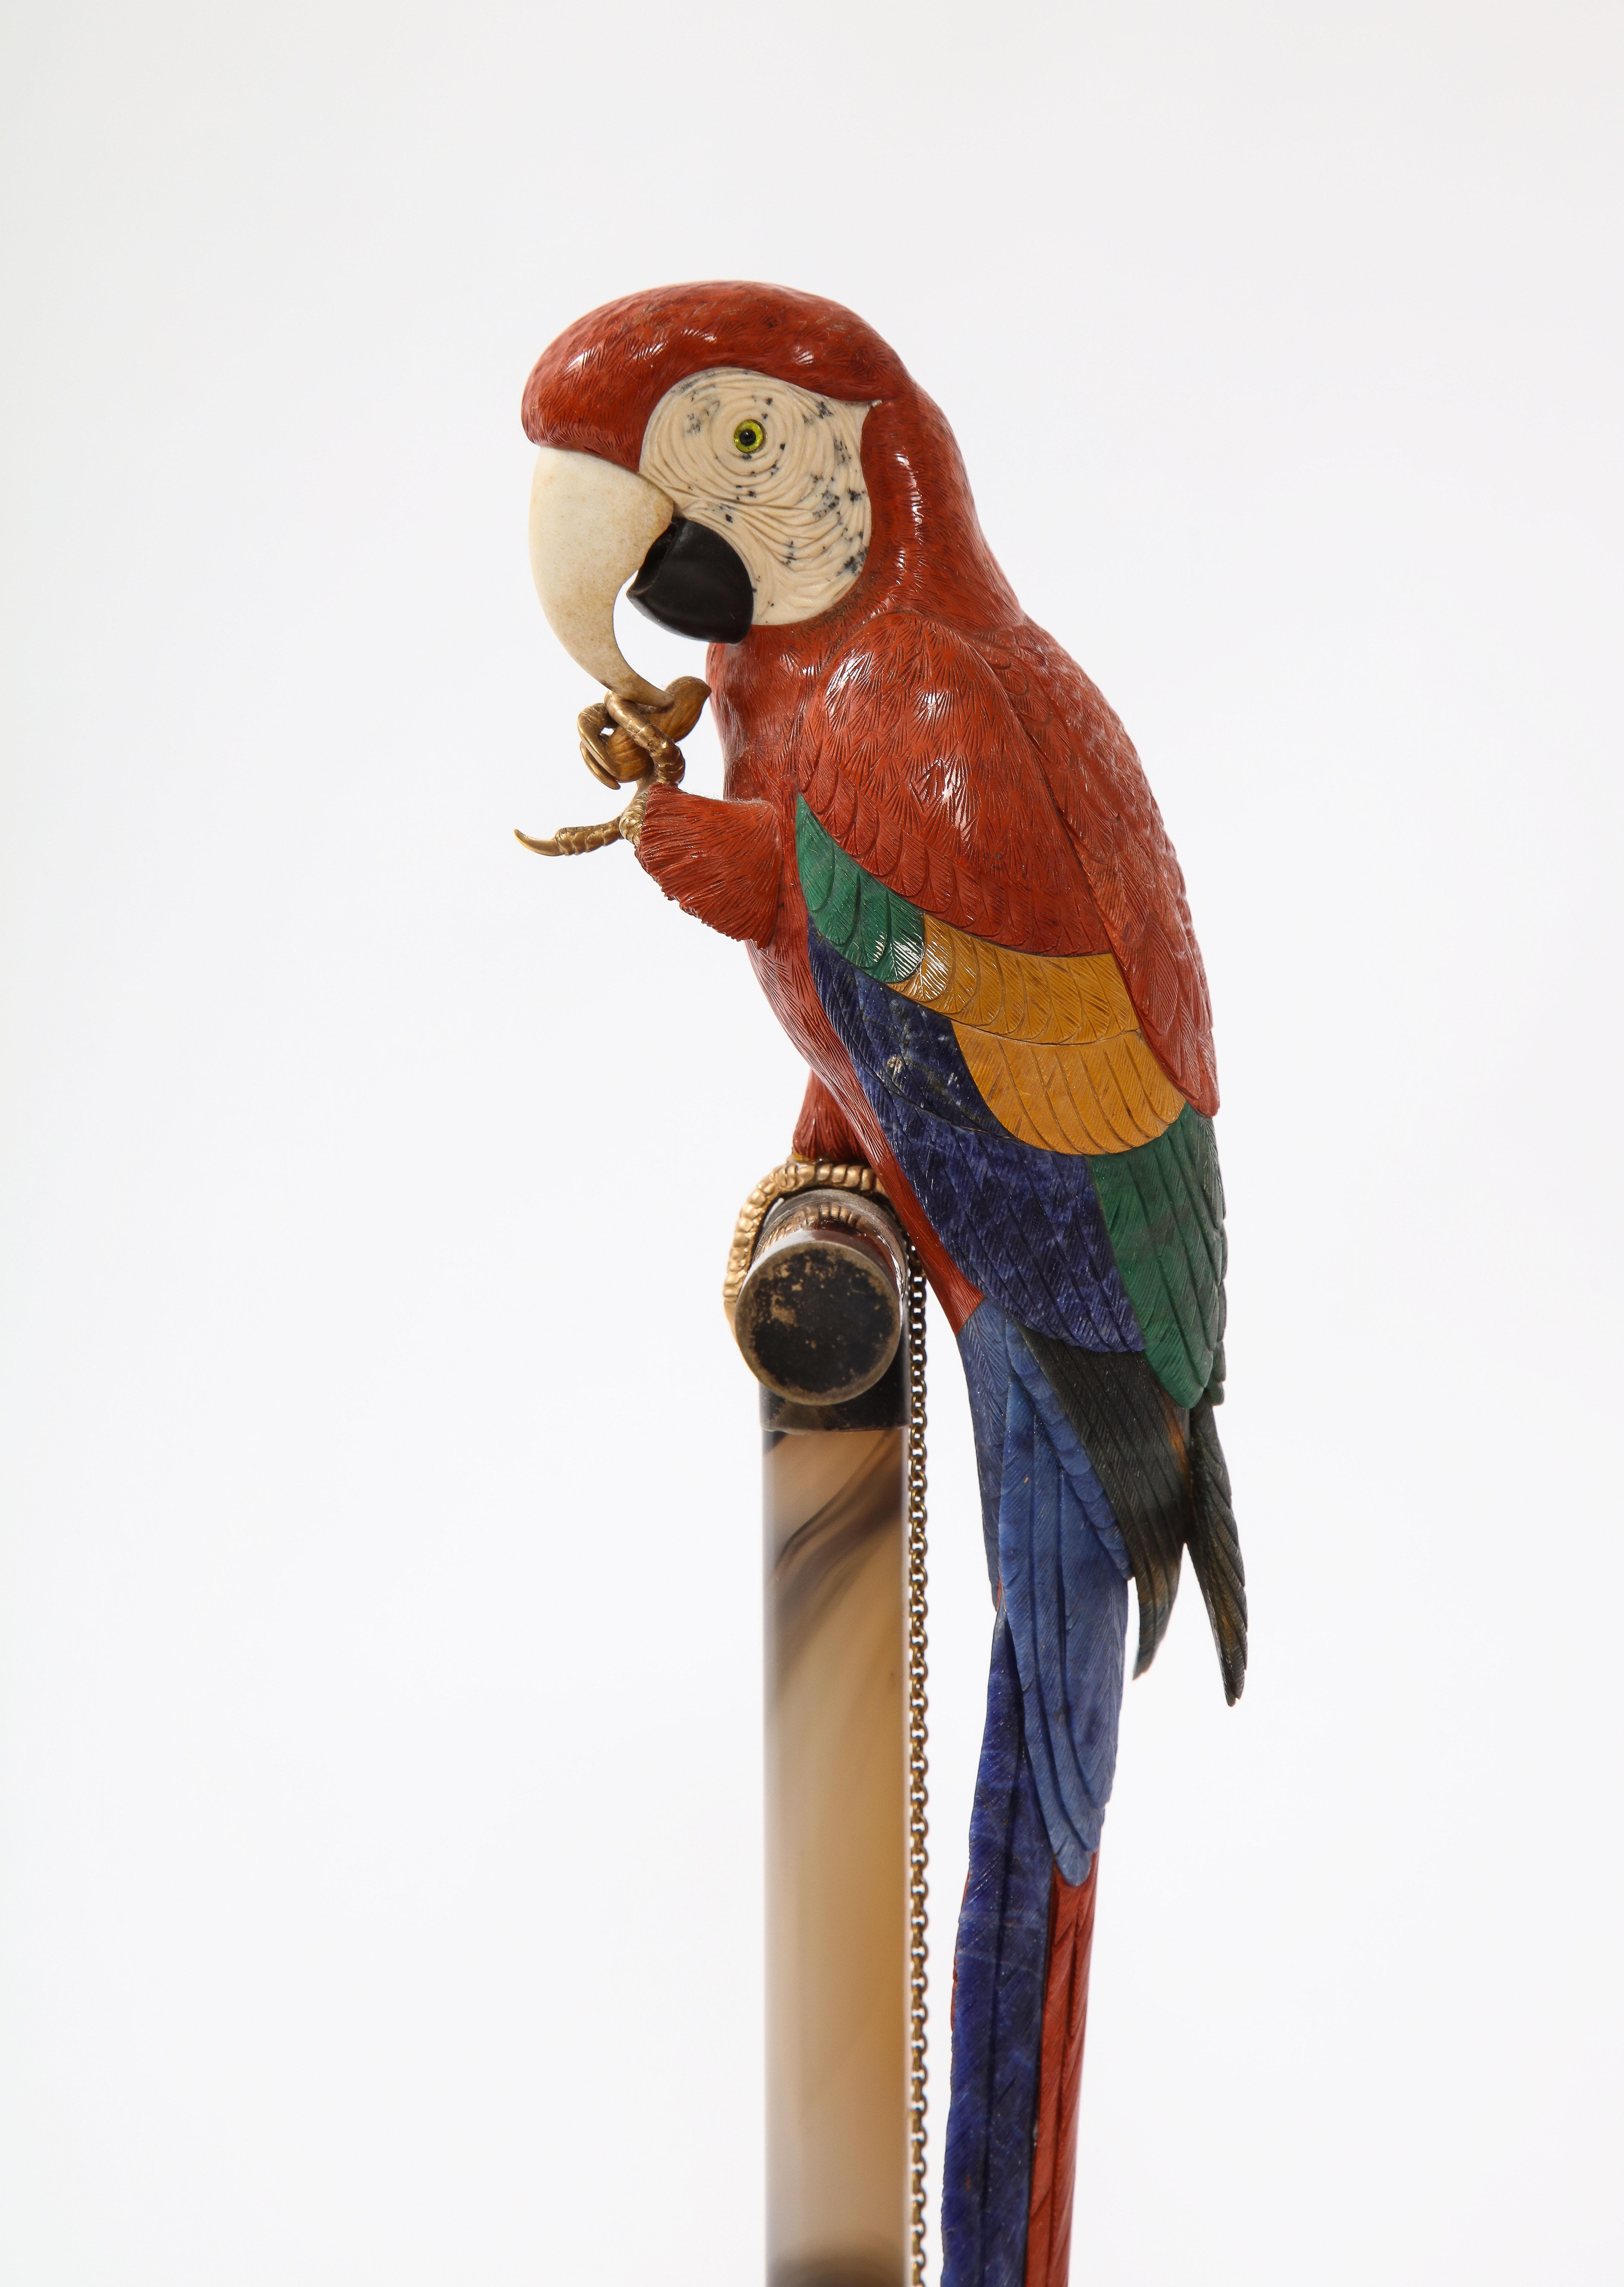 20th Century Semi Precious Stone & Metal Model of a Scarlet Macaw Parrot, P. Müller, Swiss